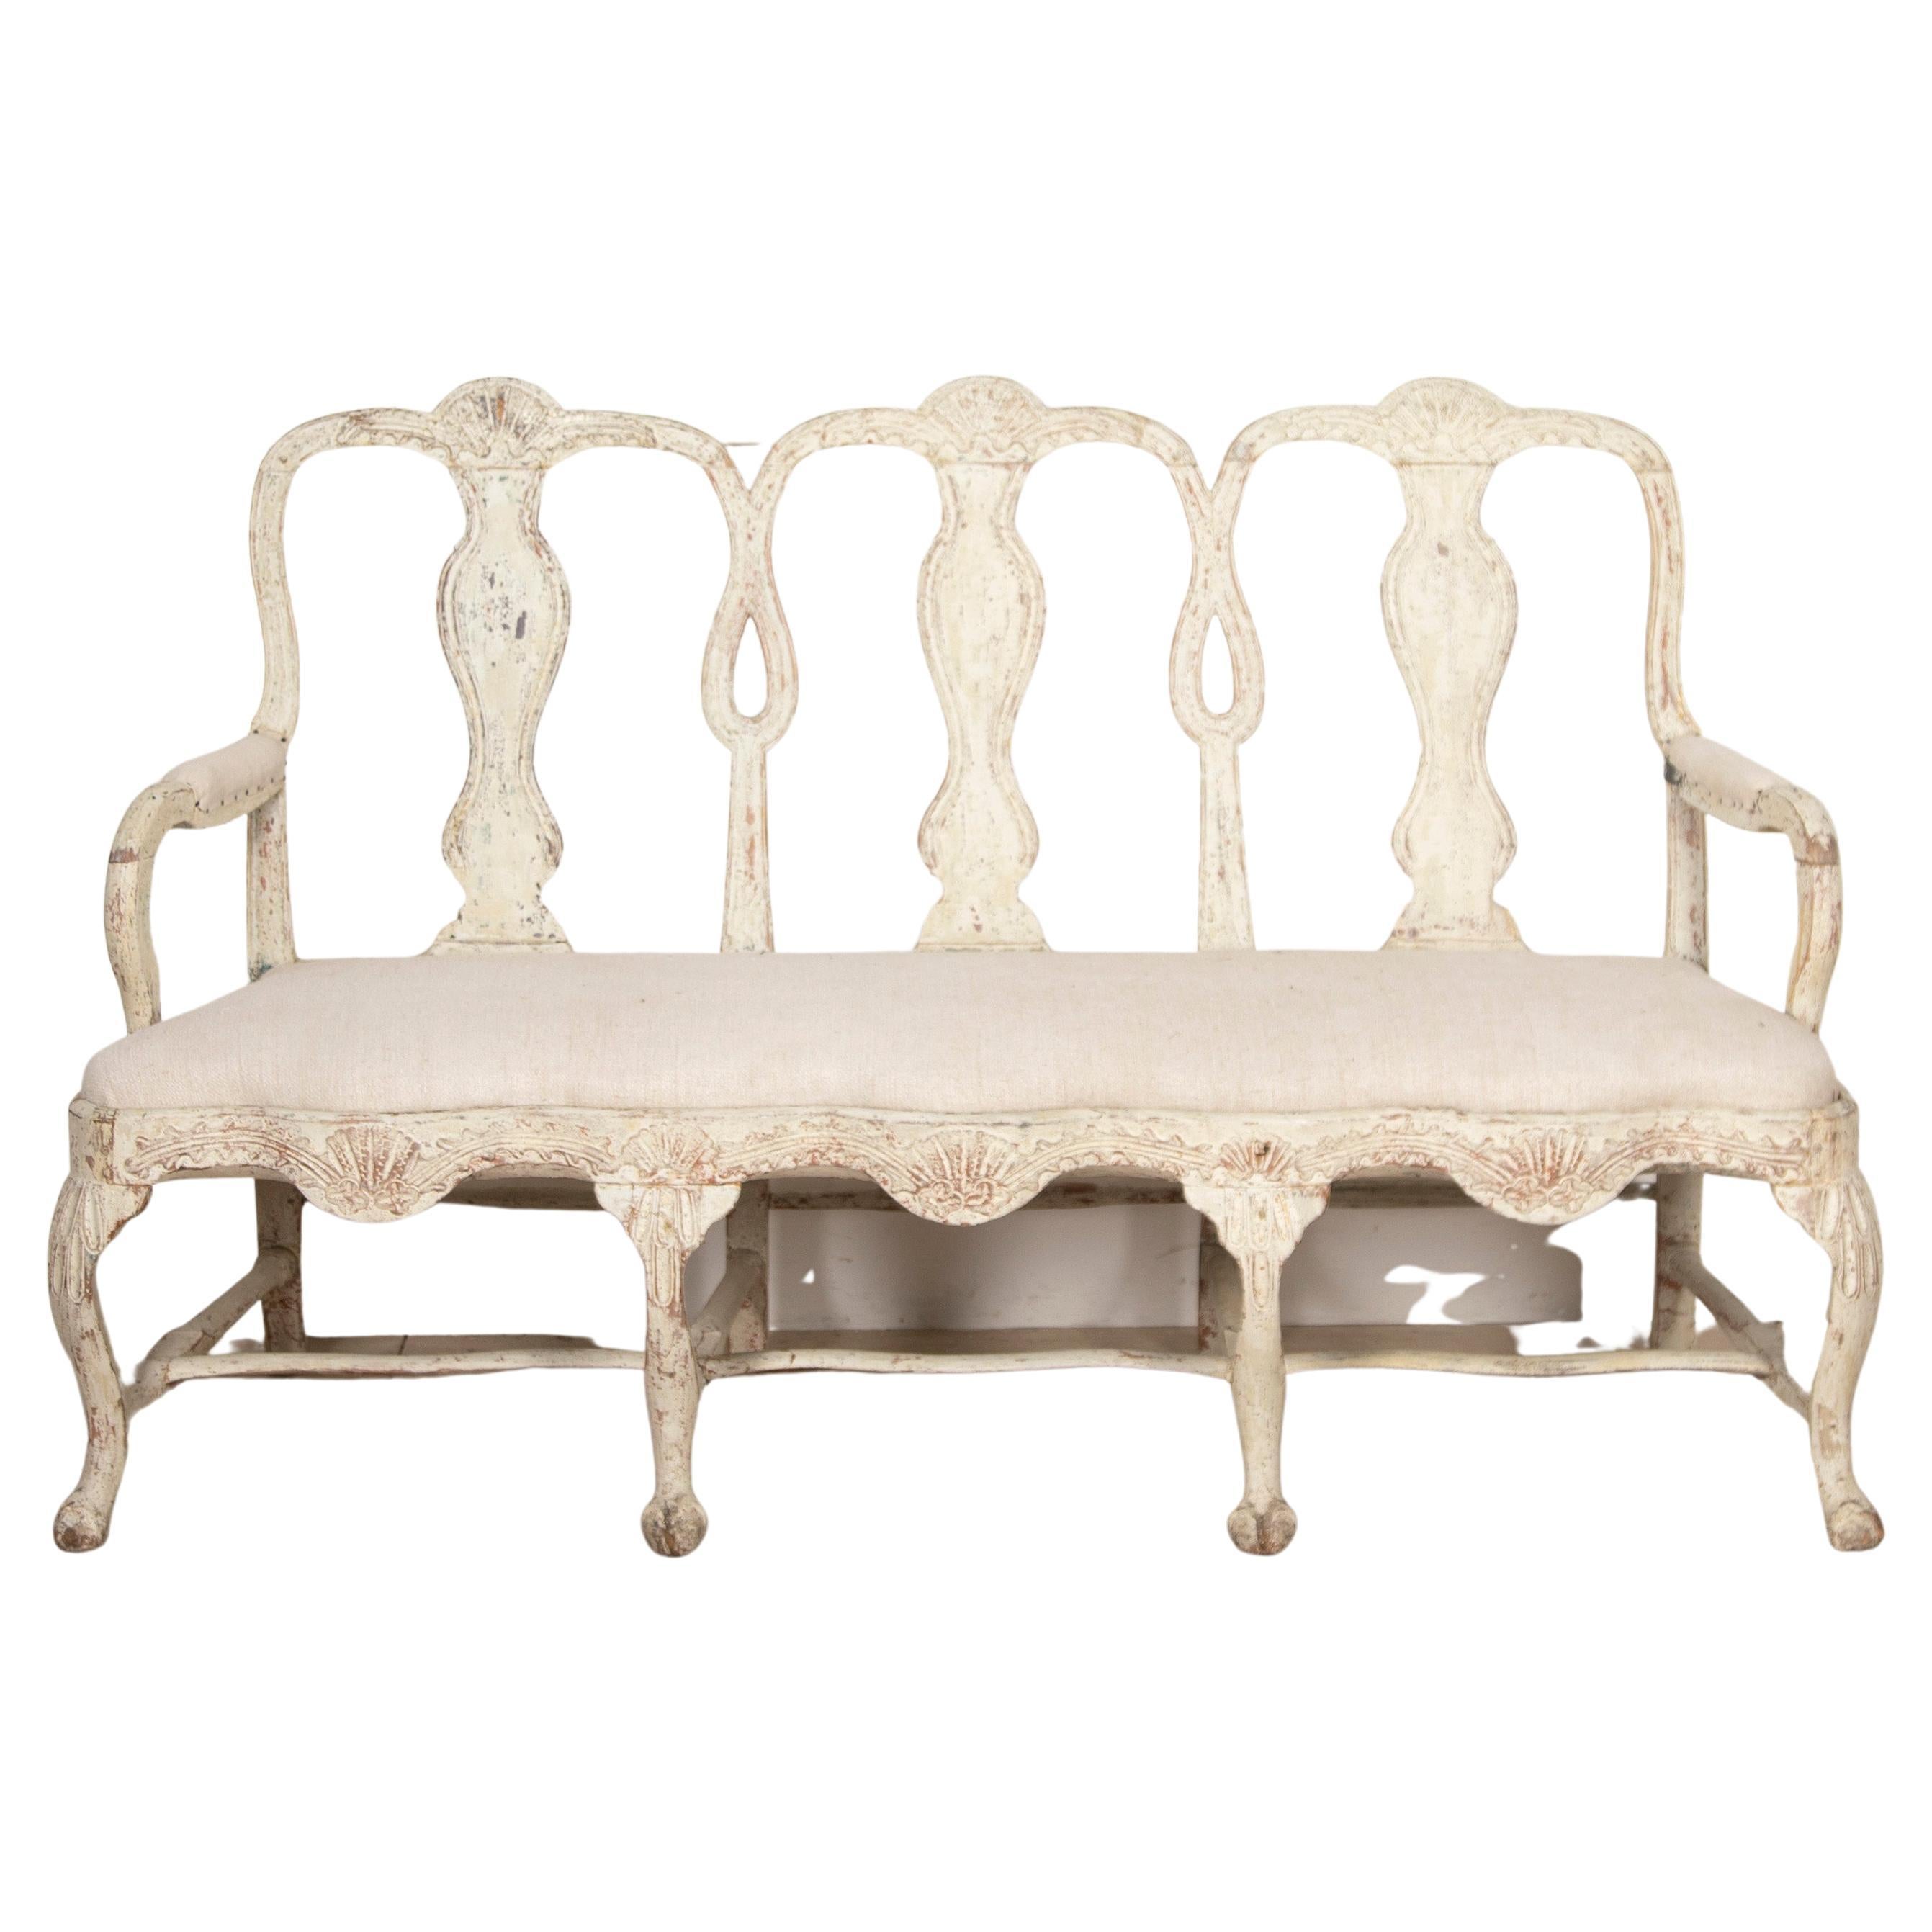 Late 18th Century Gustavian Sofa For Sale